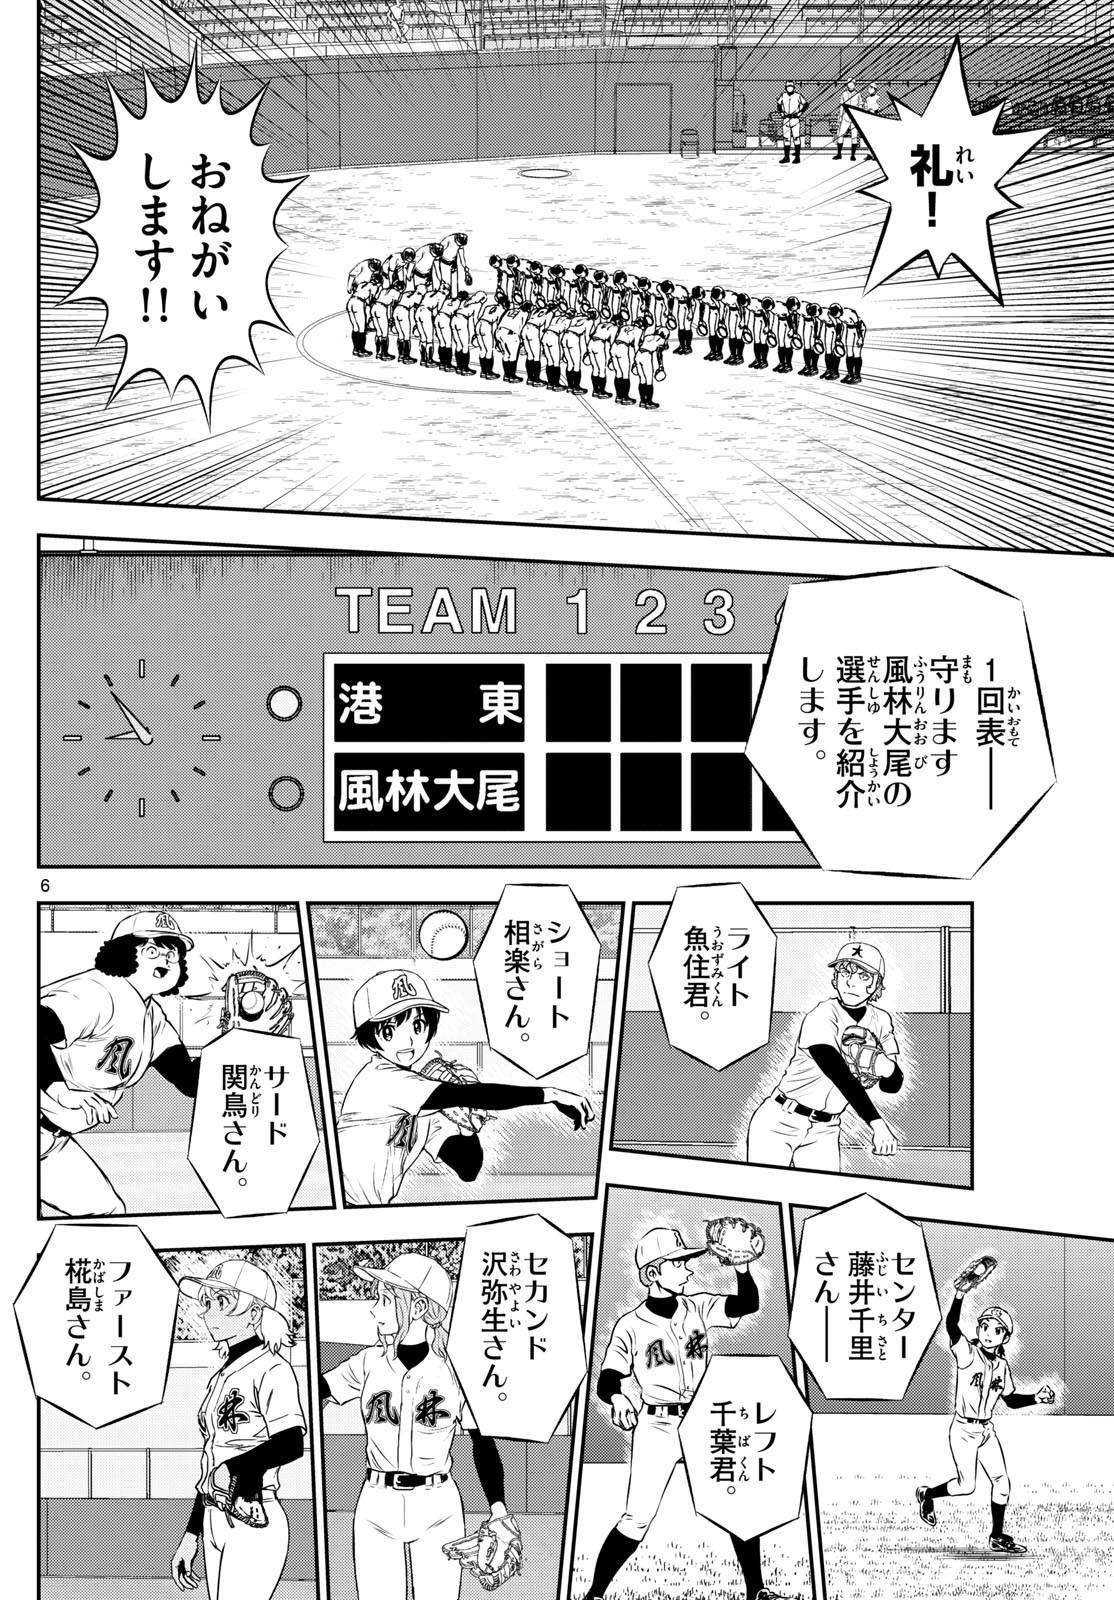 Major 2nd - メジャーセカンド - Chapter 283 - Page 6